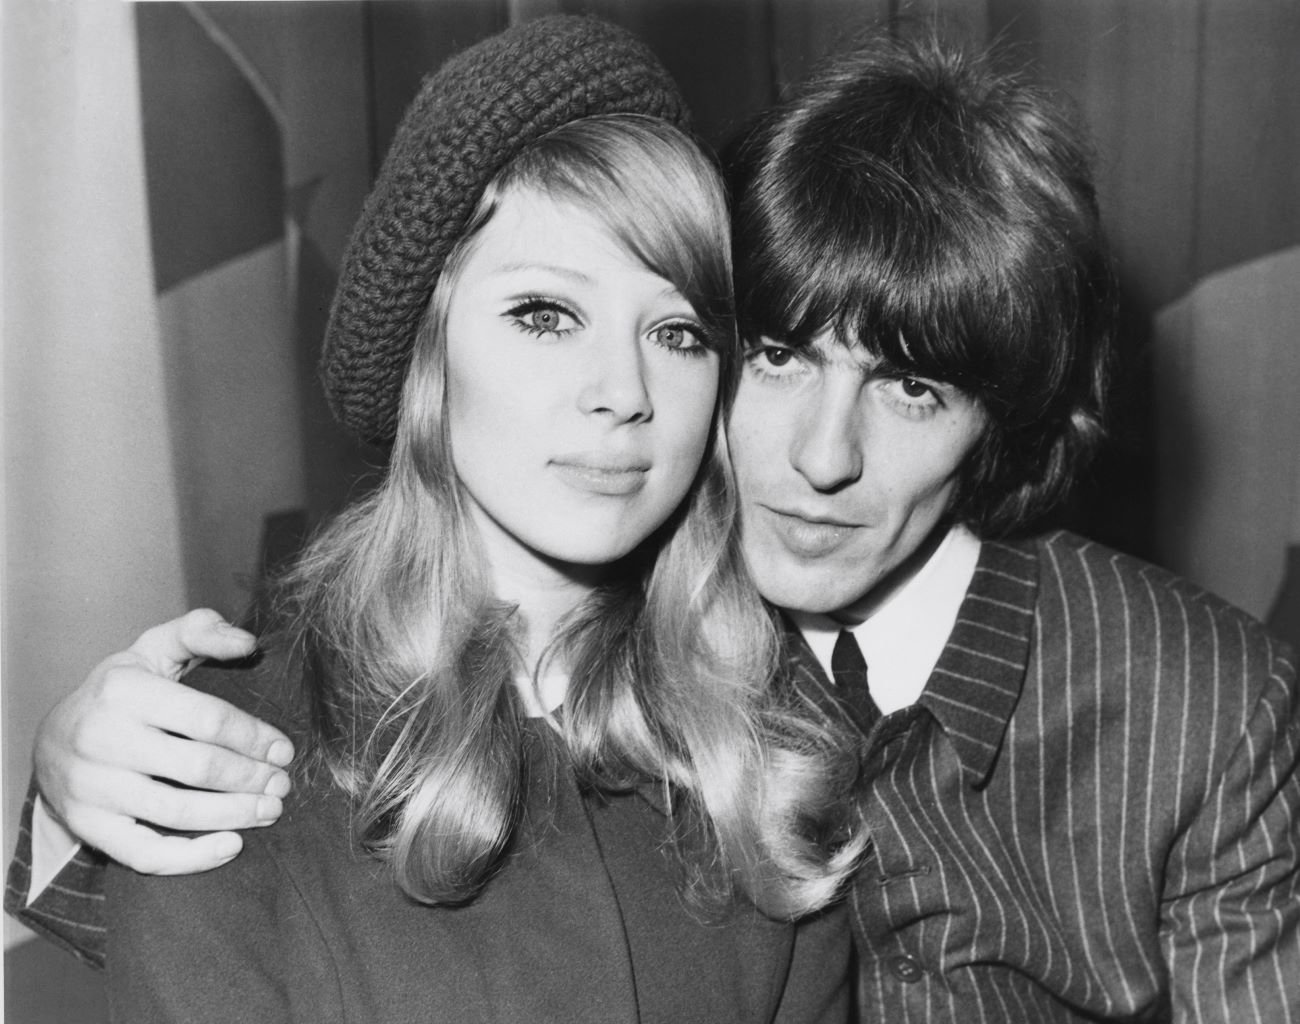 A black and white picture of George Harrison and his wife Pattie Boyd.